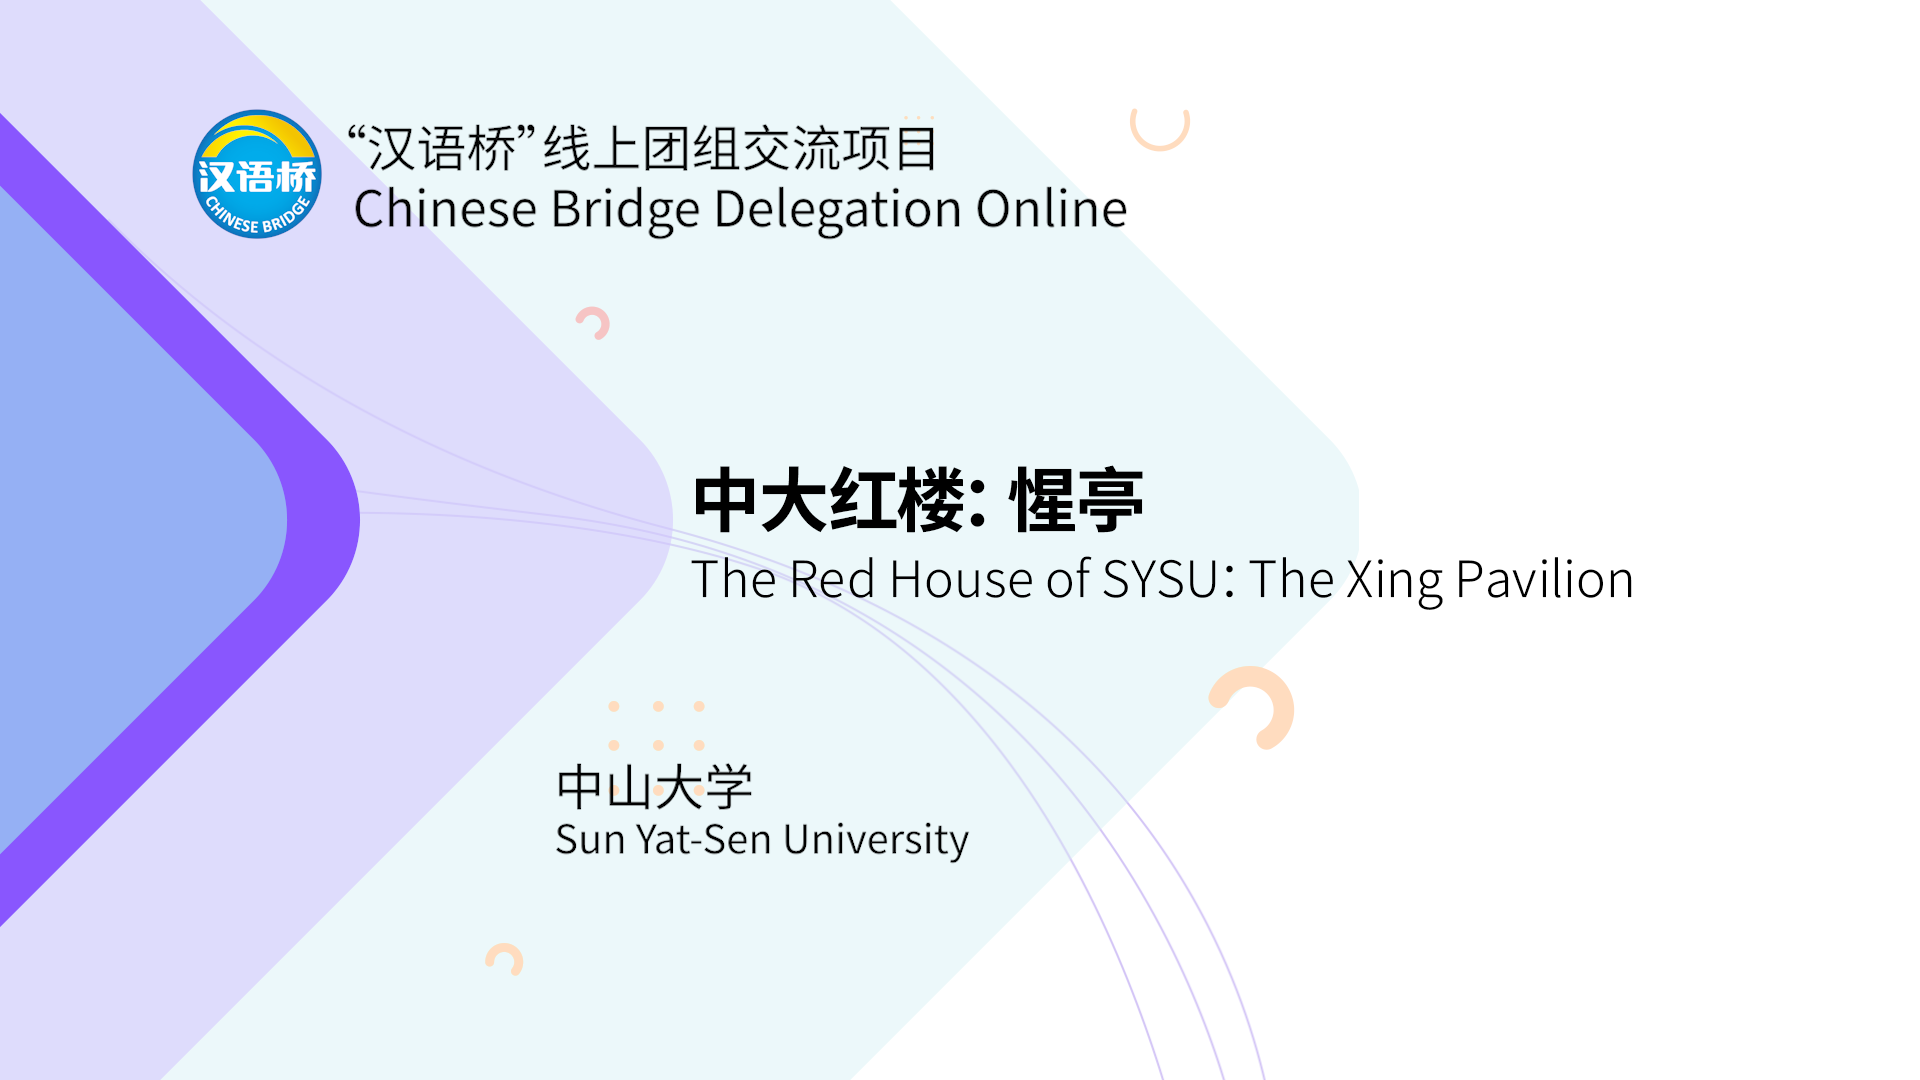 The Red House of SYSU：The Xing Pavilion